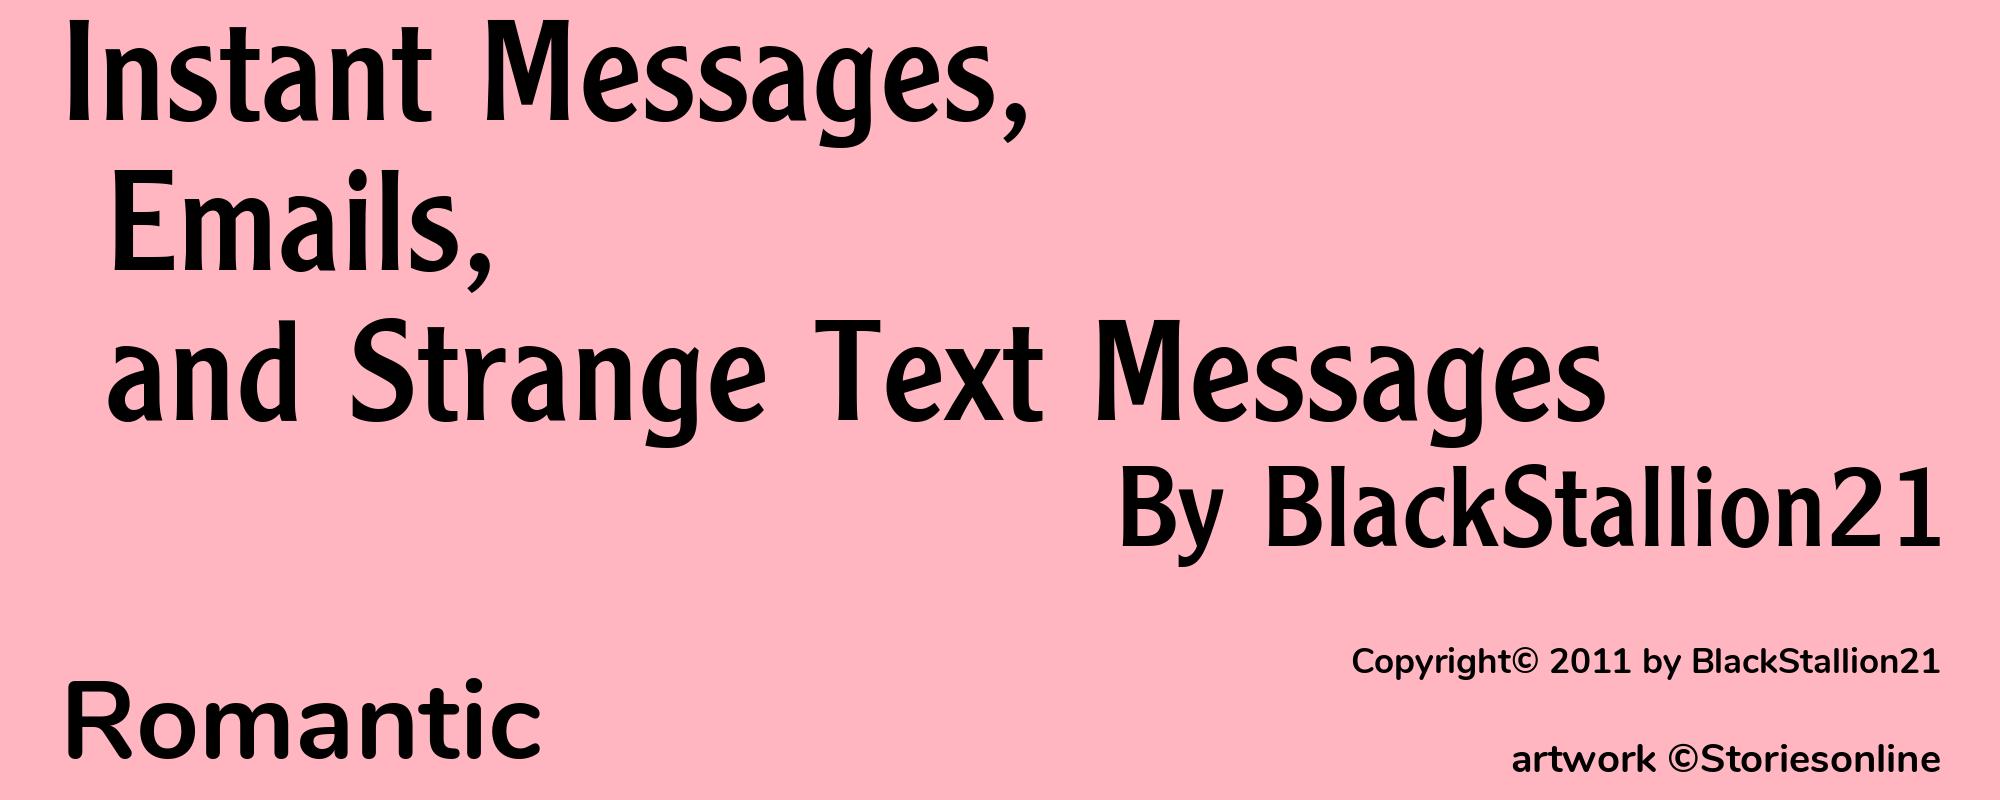 Instant Messages, Emails, and Strange Text Messages - Cover